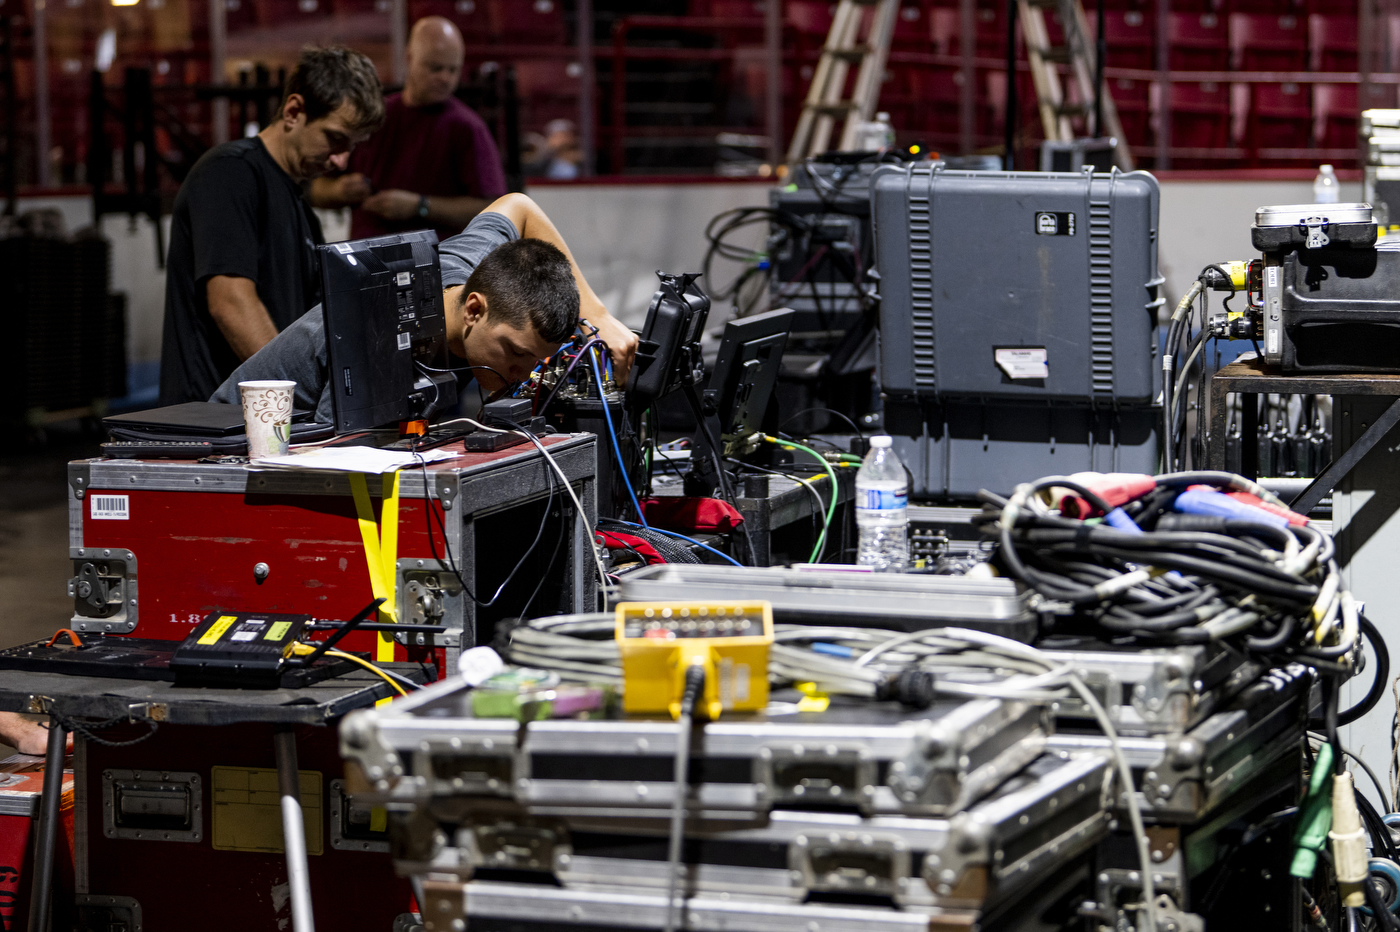 People are working on rows of wires connected to large metal boxes to prepare for Northeastern's Convocation. 